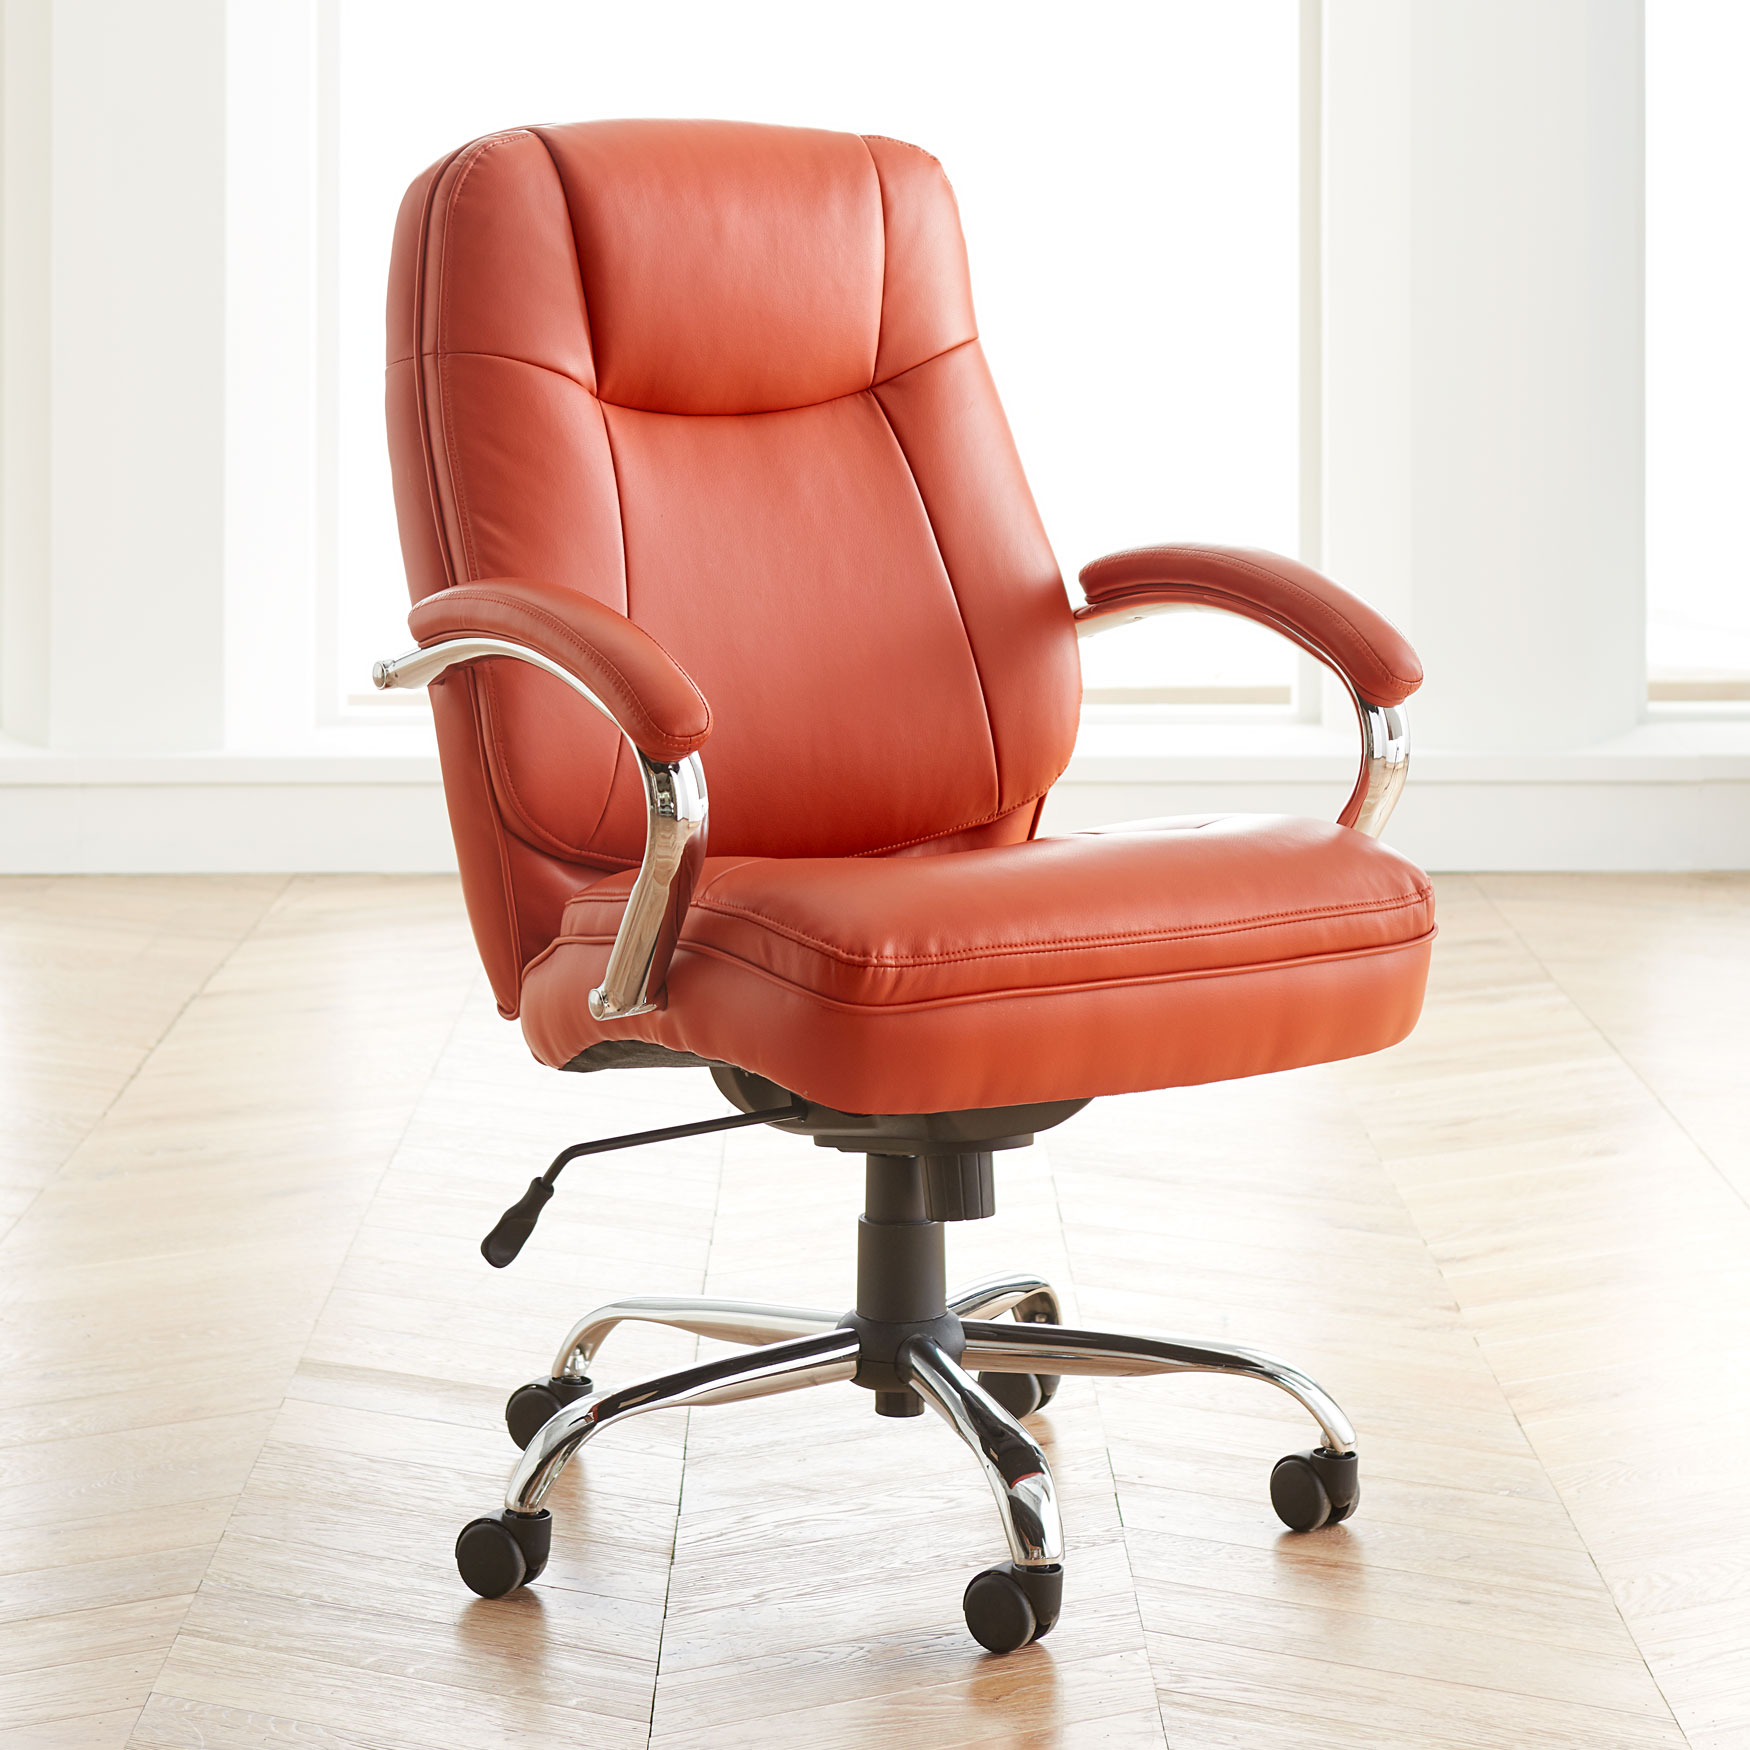 Extra Wide Women's Office Chair| Office Chairs | Brylane Home